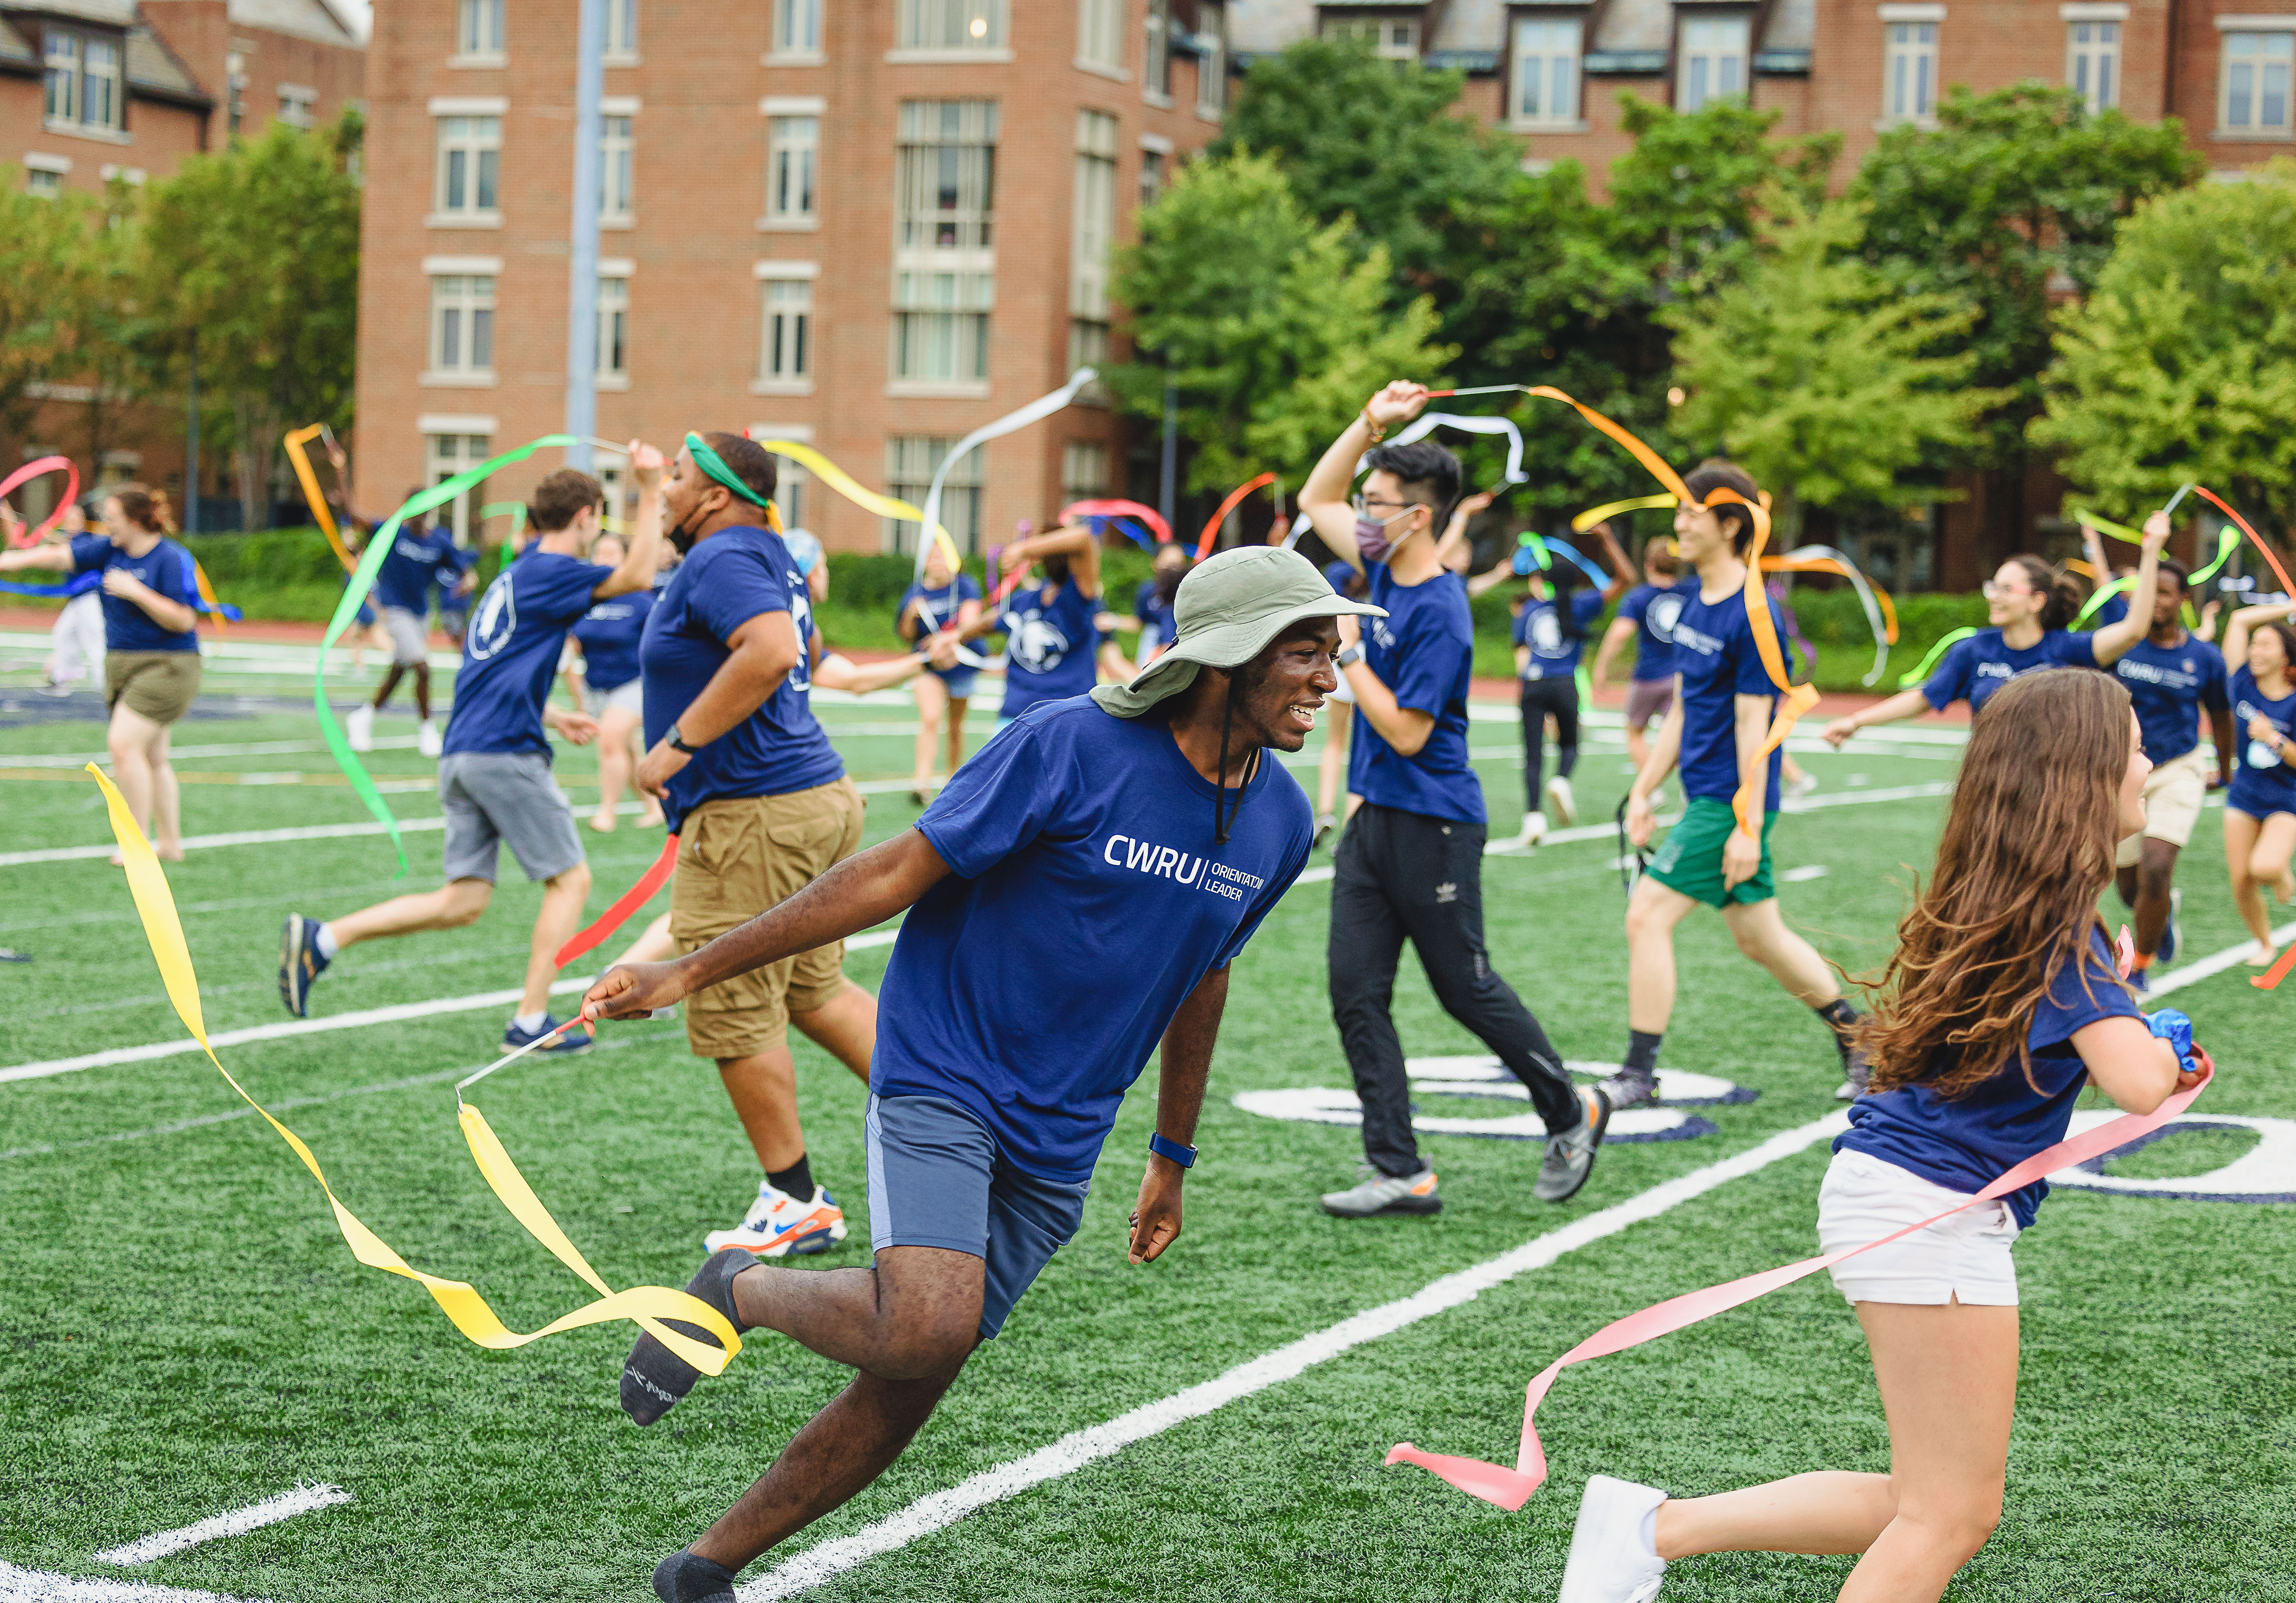 CWRU students run around on a football field with ribbon wands.